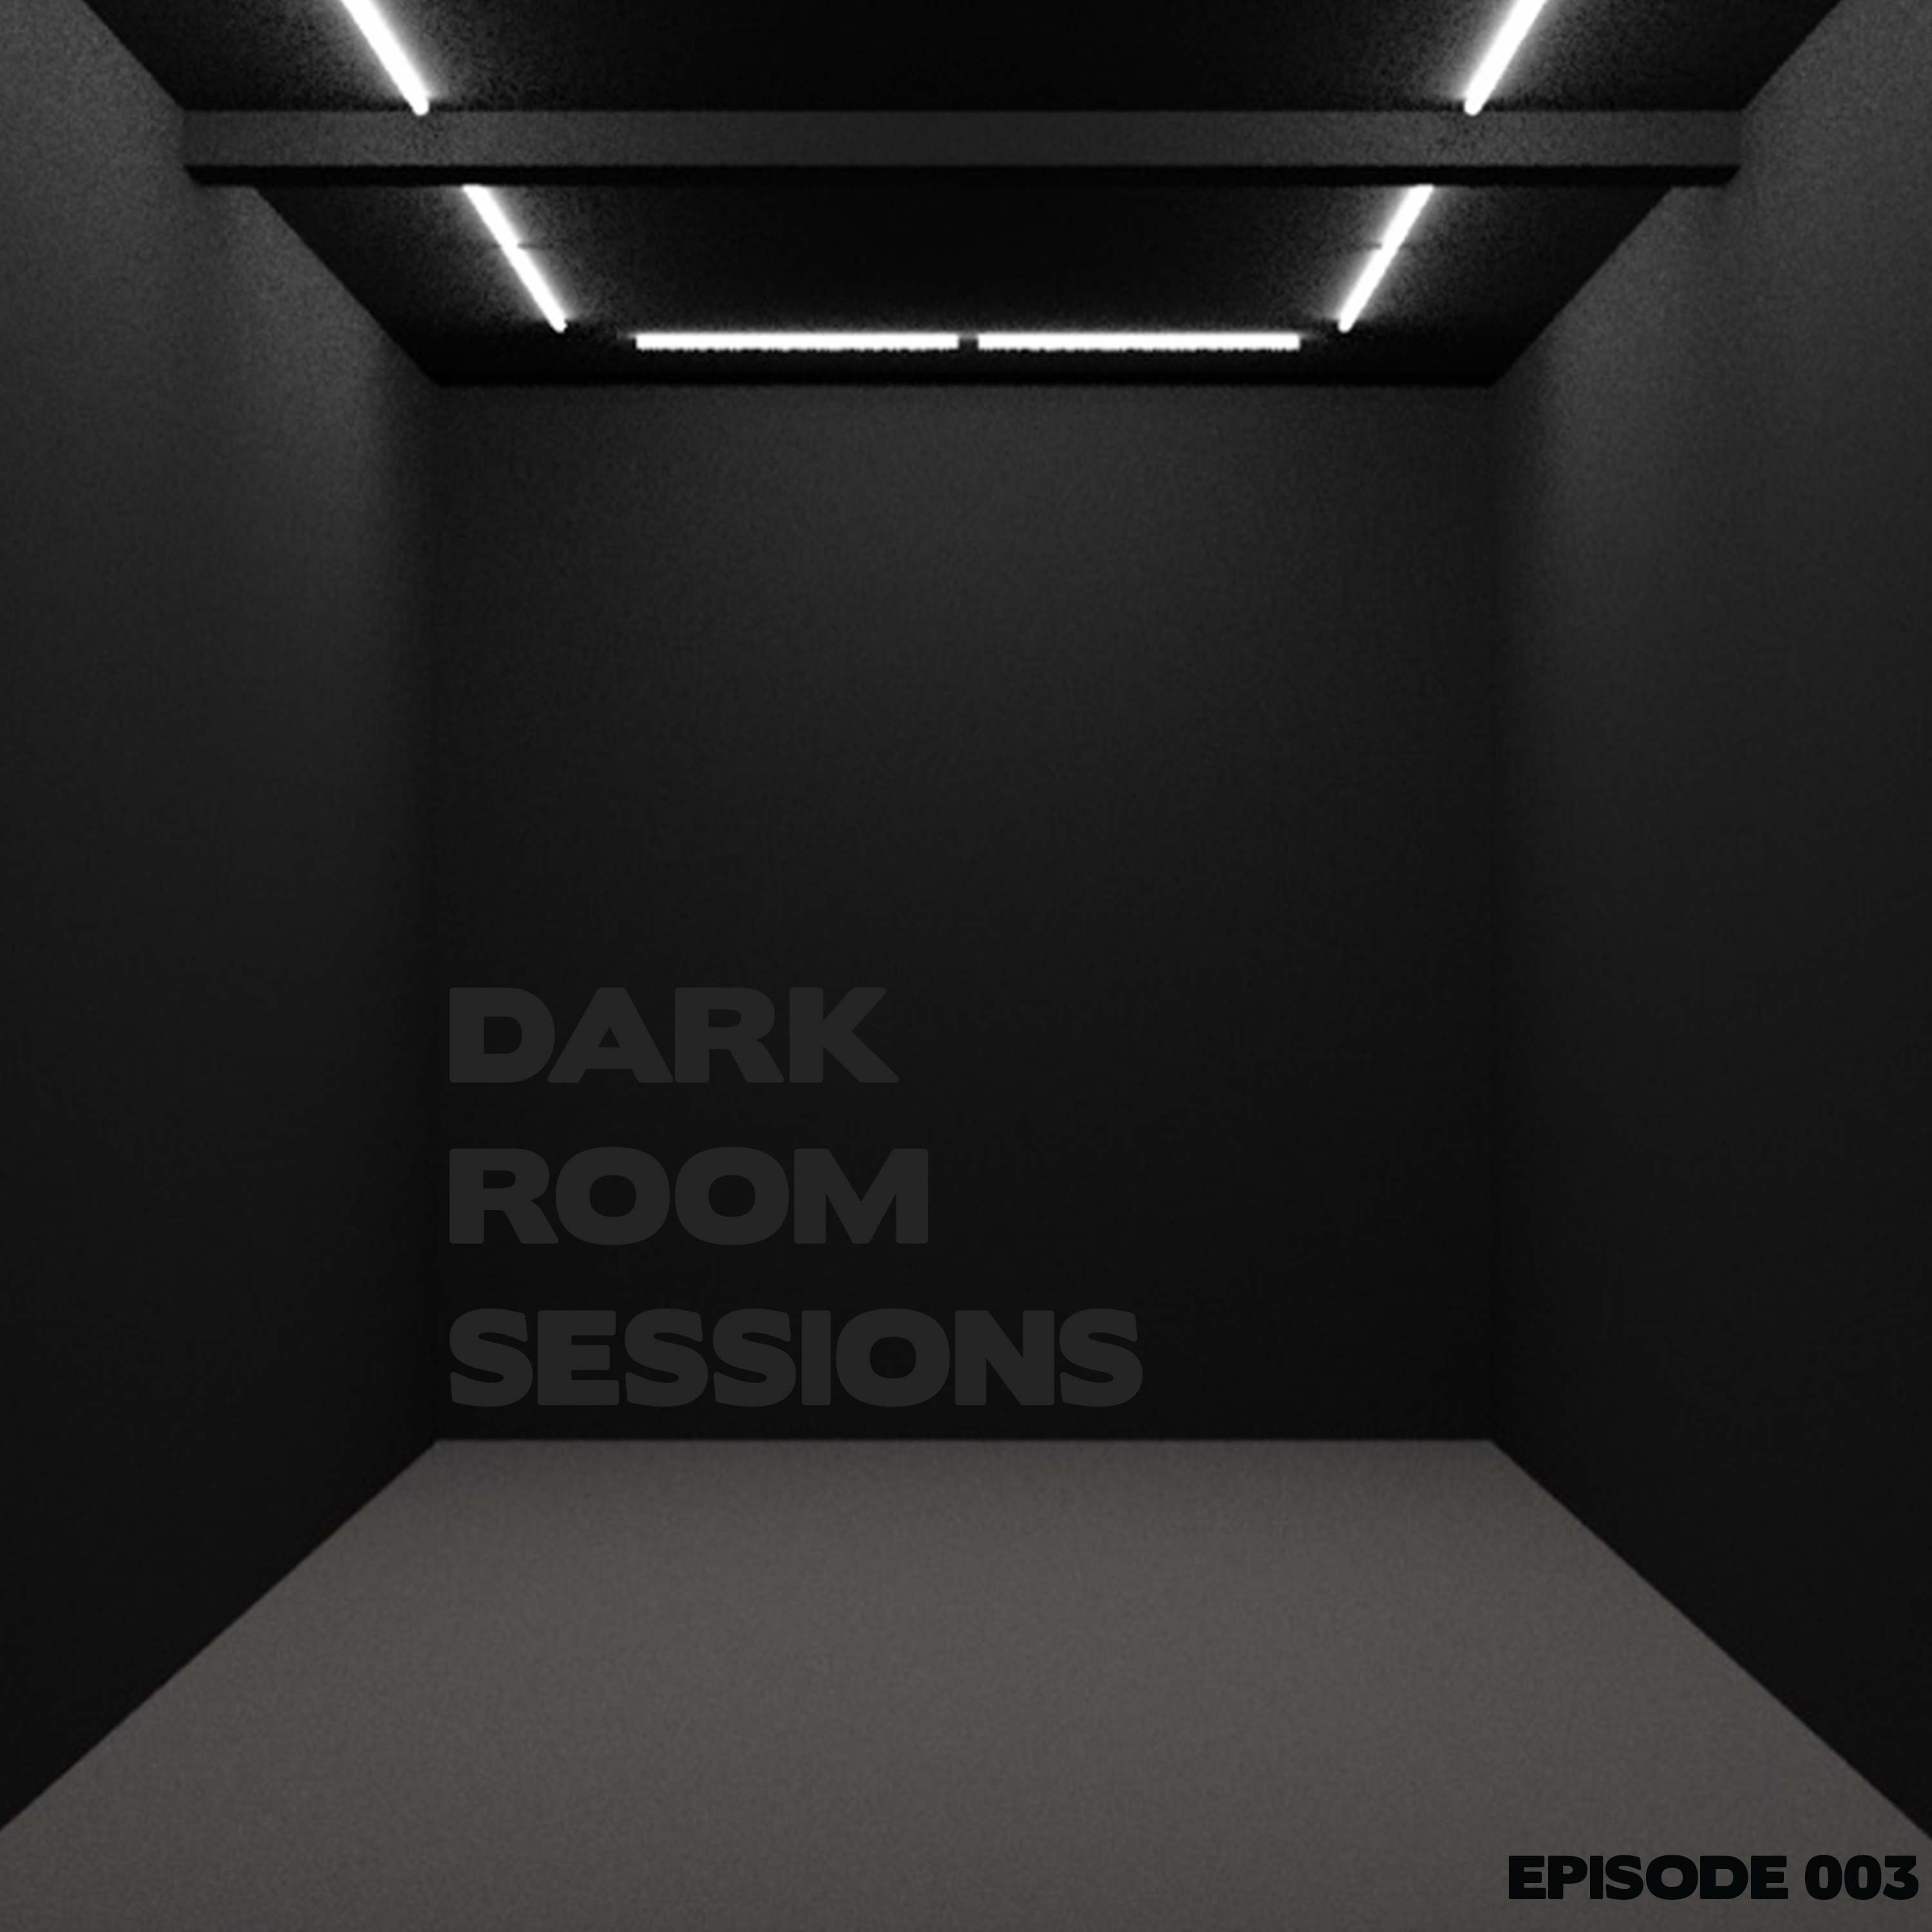 Dark Room Sessions 003 - Jess Connolly